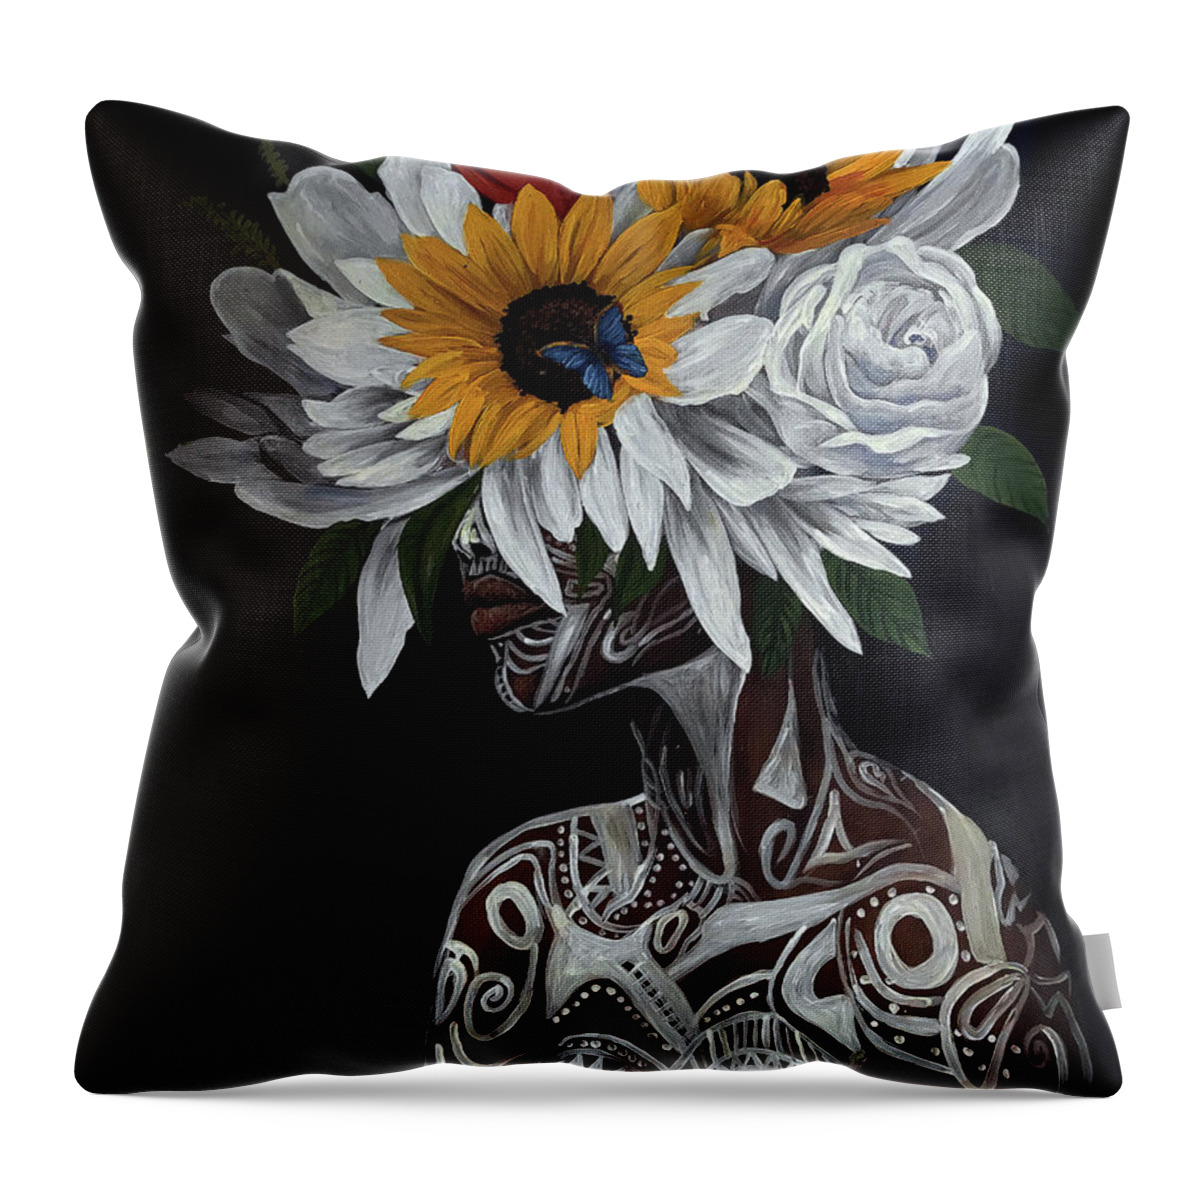 Rmo Throw Pillow featuring the painting African Blossom by Ronnie Moyo